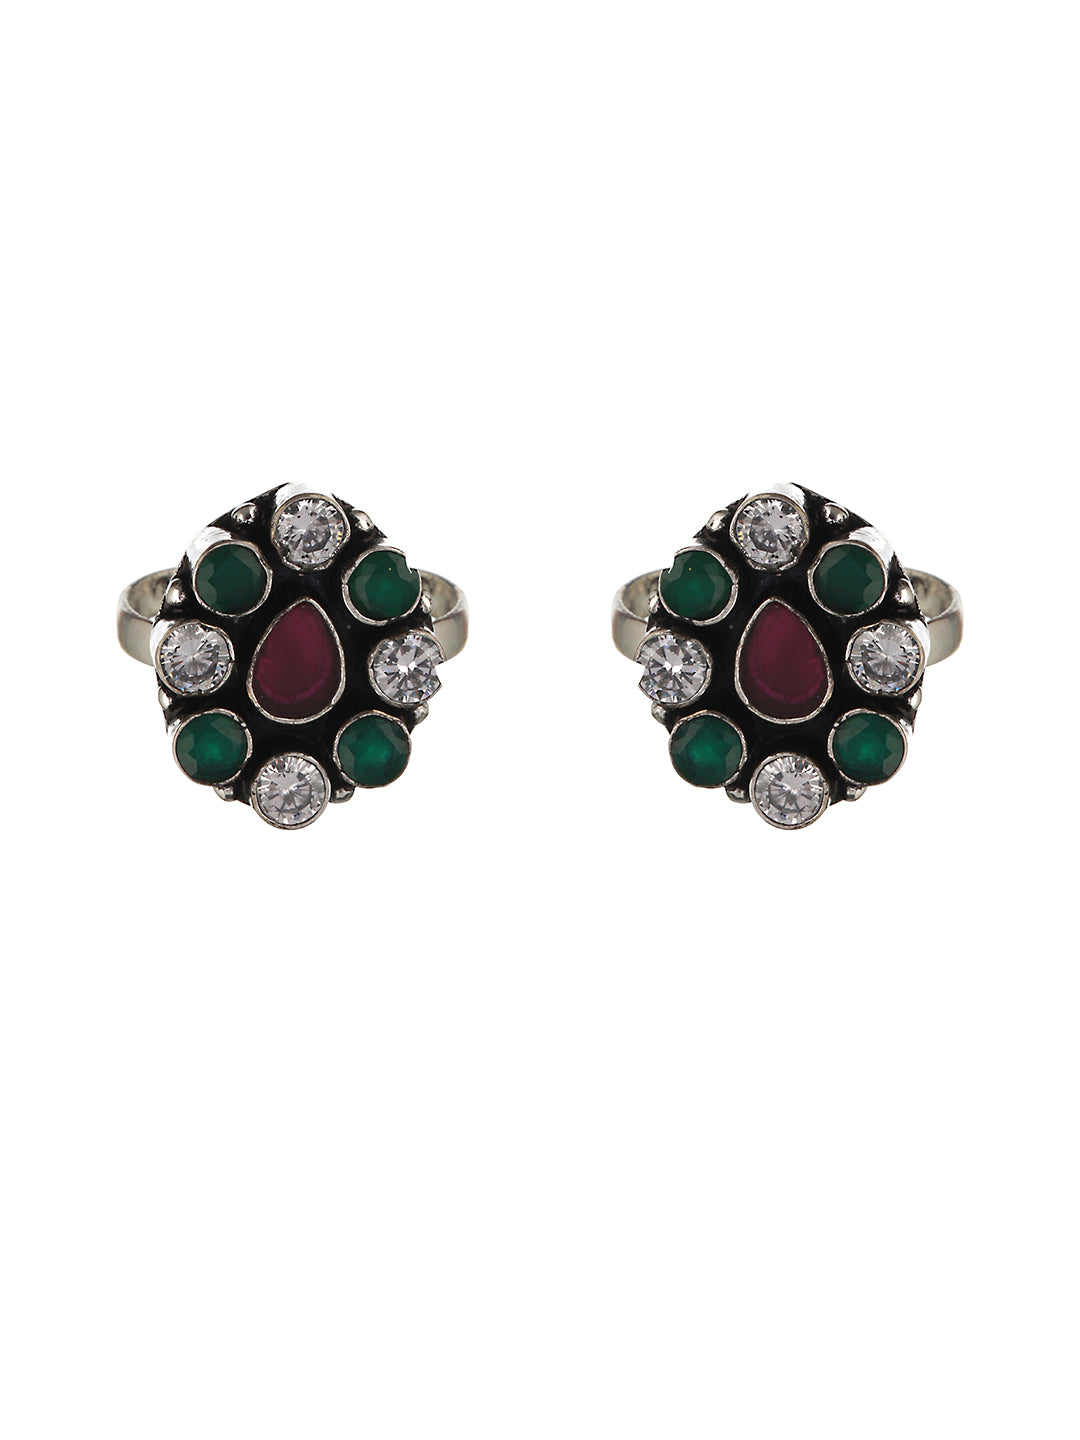 Set of 2  Silver Toned Red & Green Stone Studded Adjustable Toe Ring, zaveri pearls, sale price rs, sale price, sale gold plated, sale gold, sale, rubans, ring, regular price, priyassi jewell